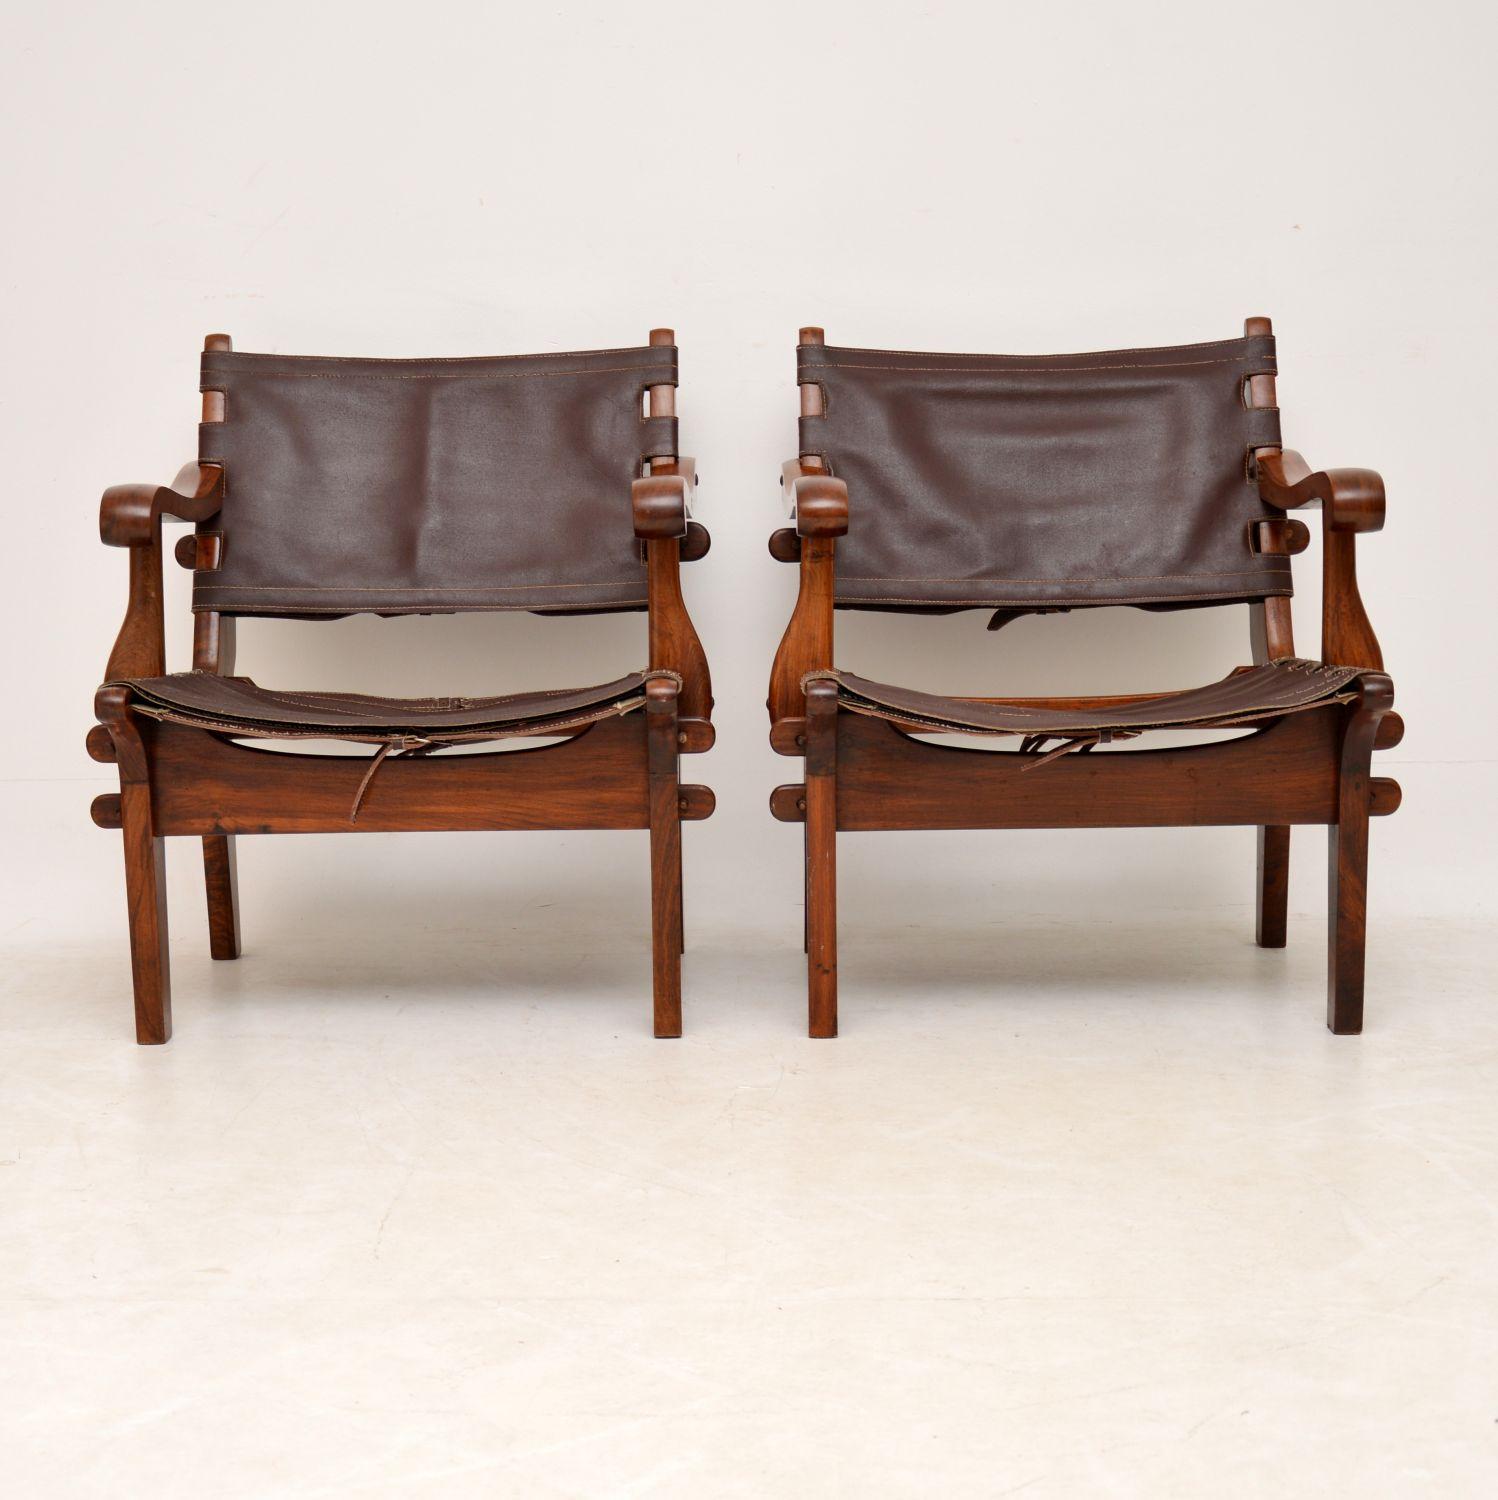 A stunning and rare pair of vintage safari chairs in solid rosewood and leather, these were made in Equador in the 1960s, they were designed by Angel Pazmino. They are in excellent vintage condition, the frames are all clean, sturdy and sound, with